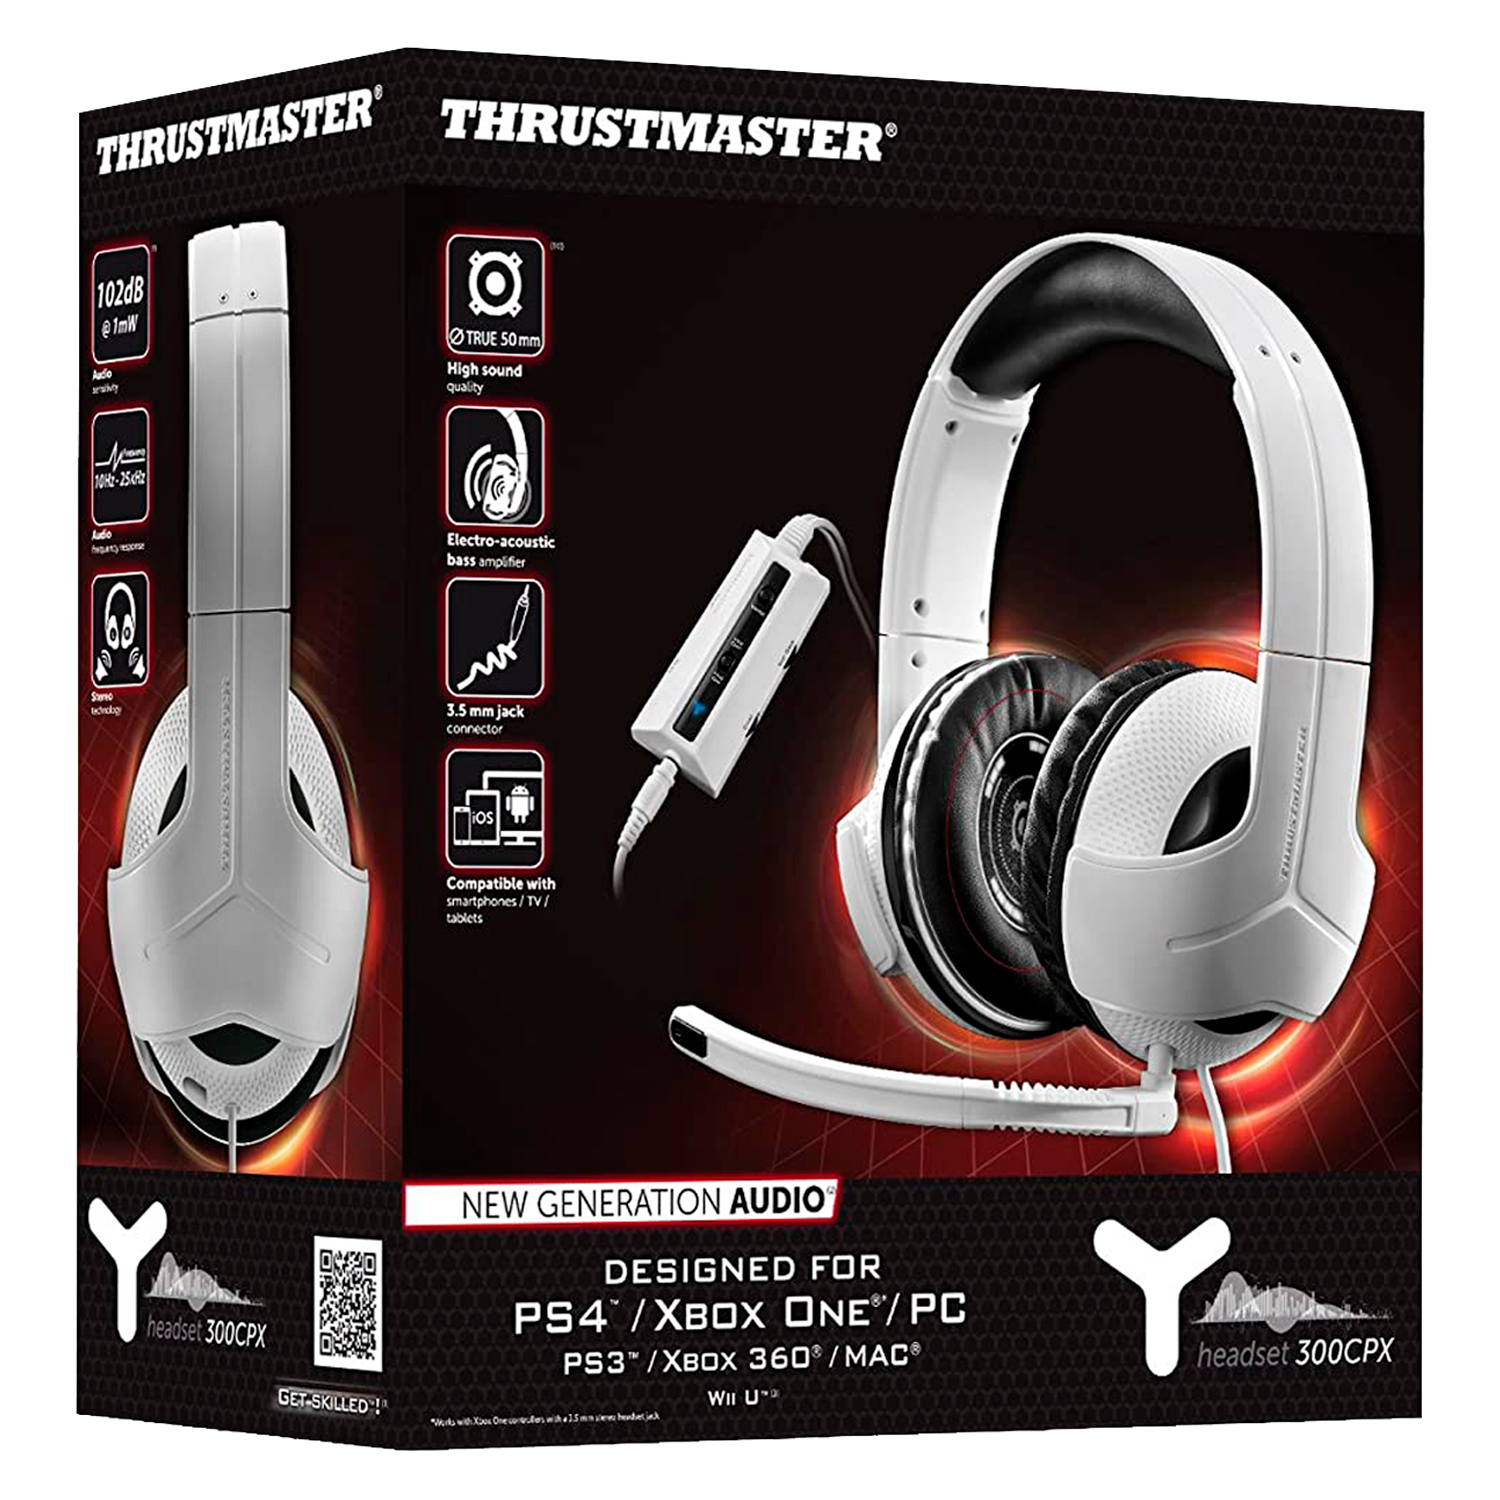 Headset Gamer Thrustmaster Y-300CPX para PC / Xbox / PS4